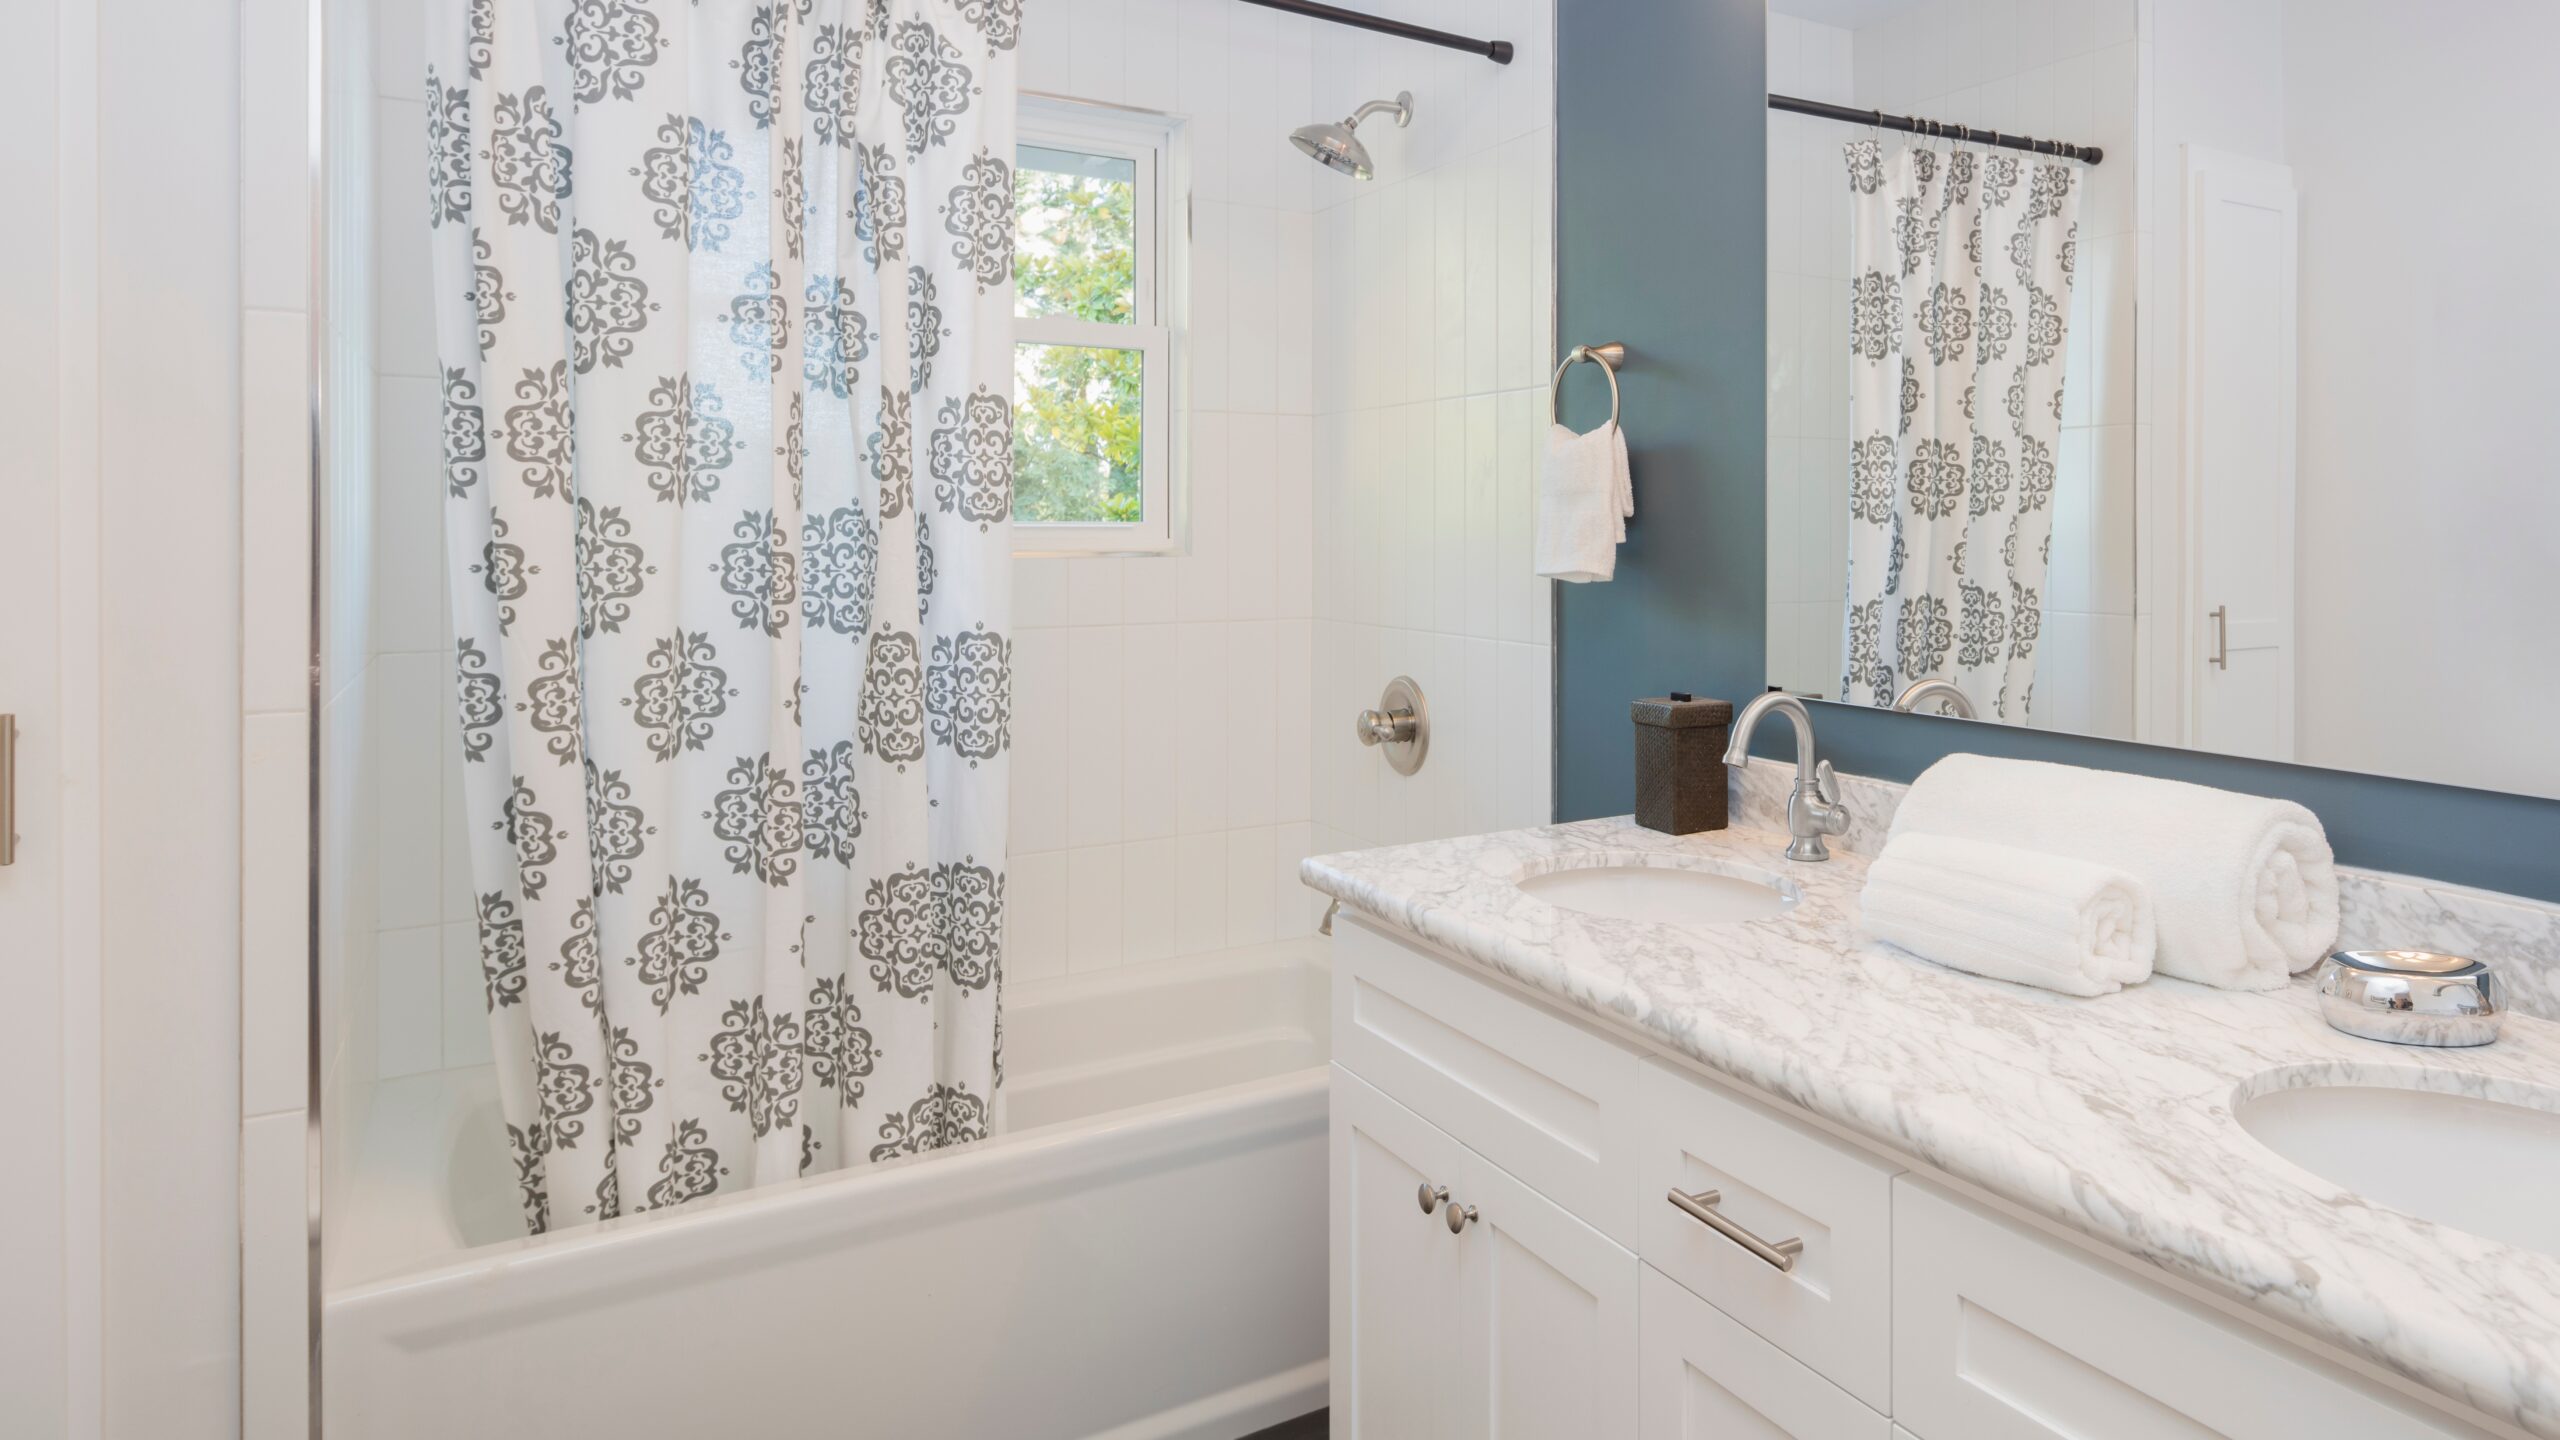 A white bathroom with a white bathtub and detailed shower curtain